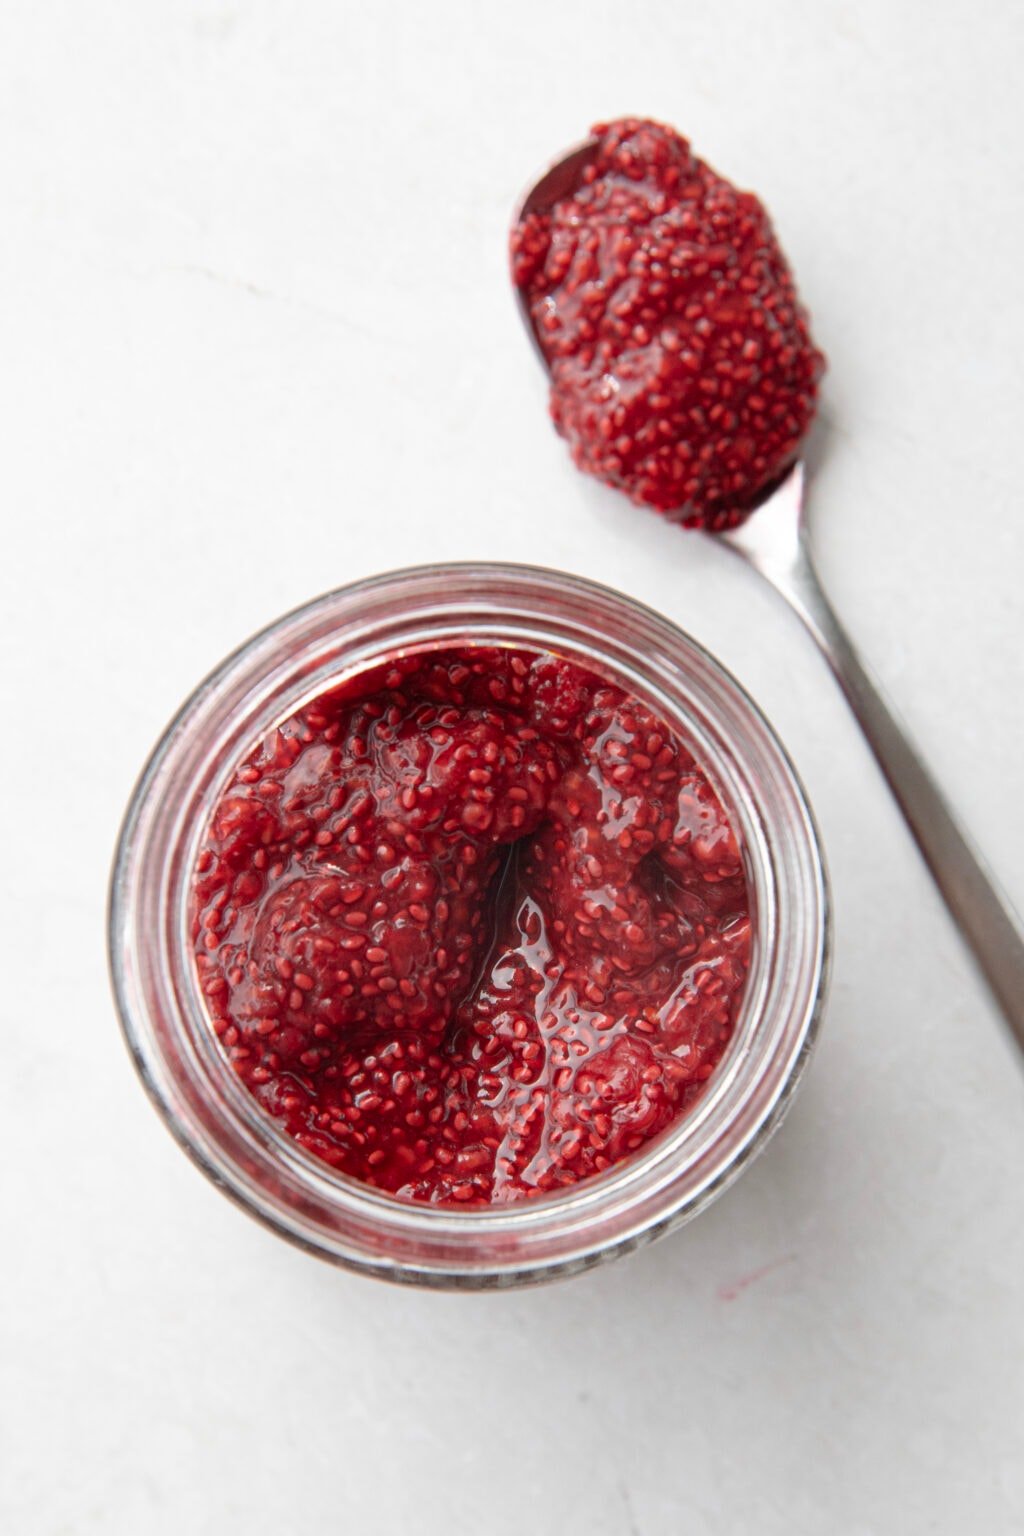 A bird-eye view of a jar of raspberry chia jam, filled near the top. A spoon of chia jam lies next to it.